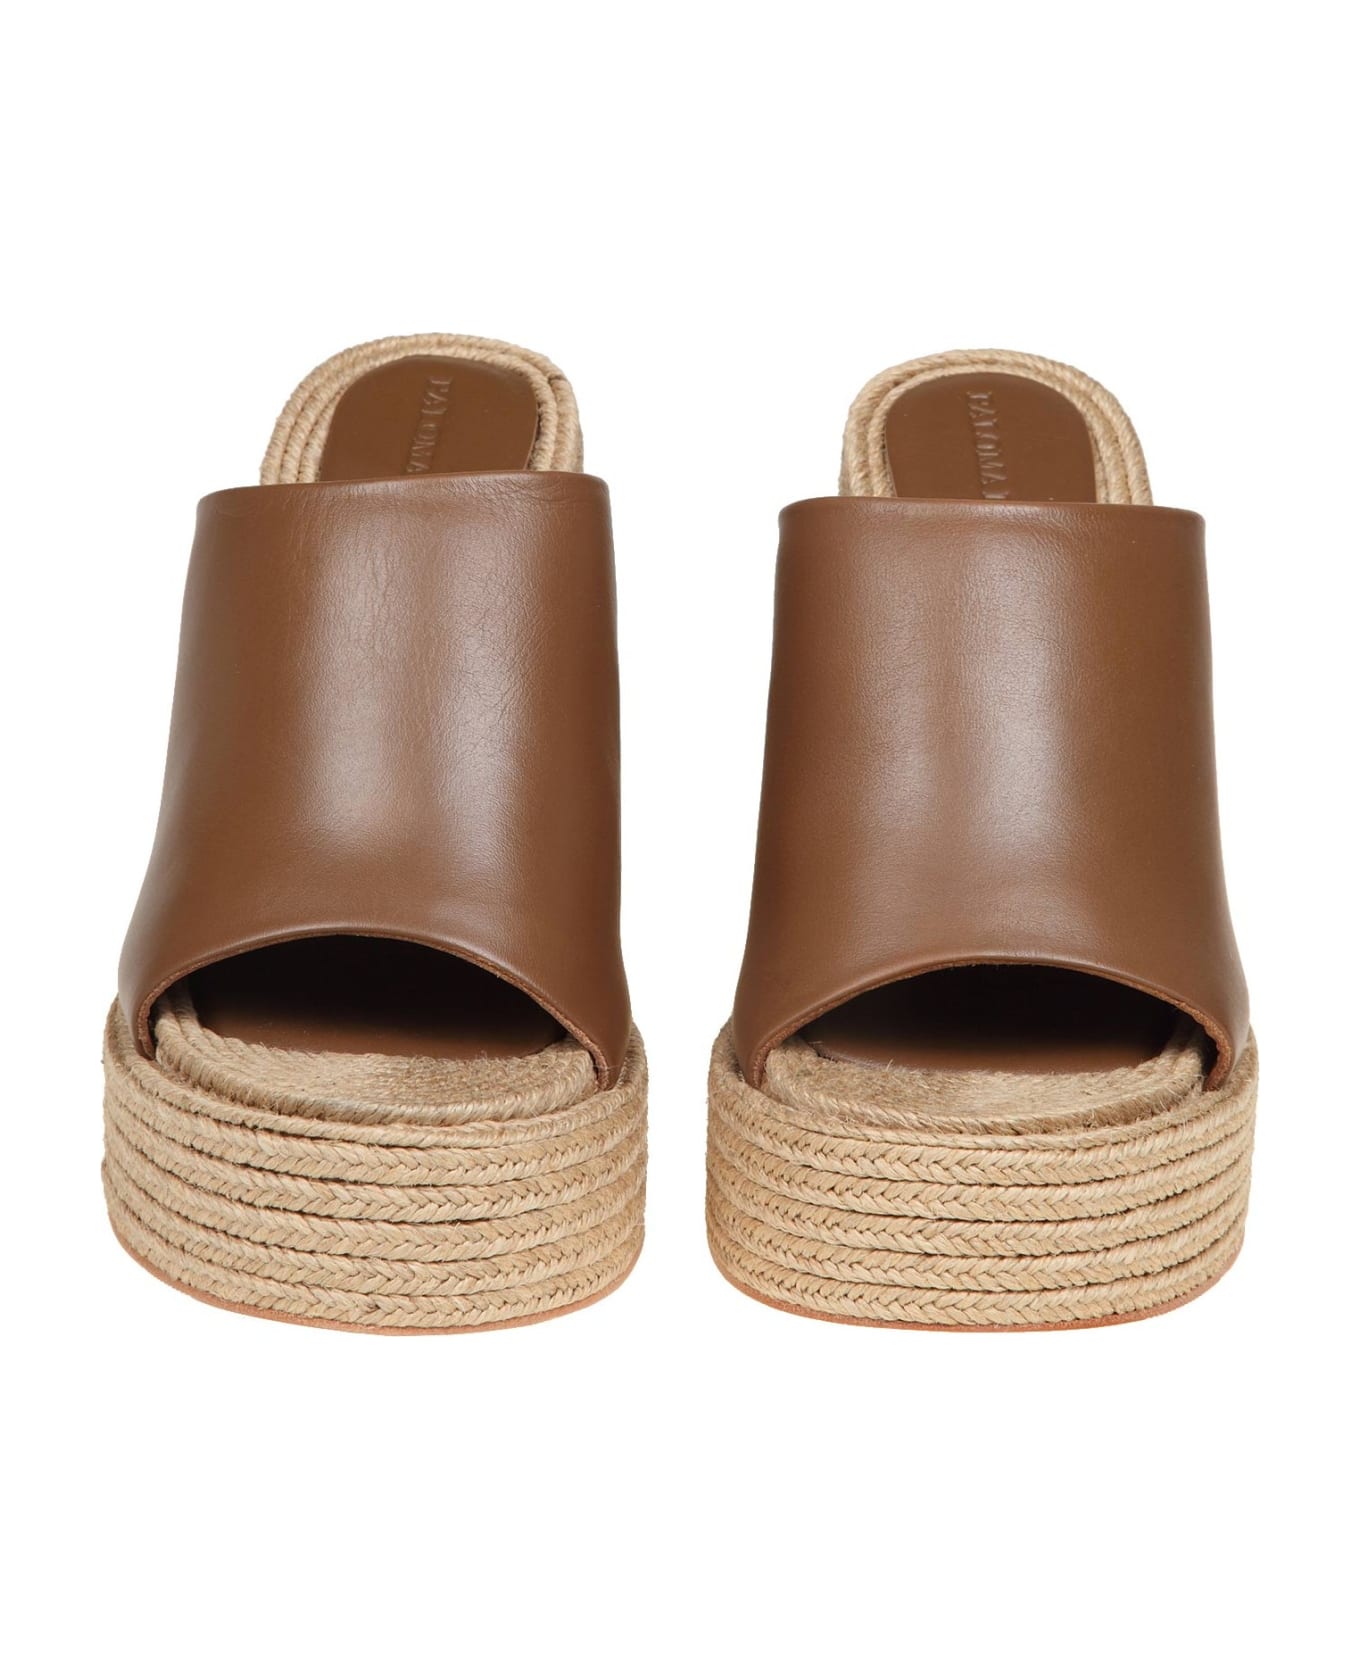 Paloma Barceló Camila Wedge Sandal In Leather Color - Leather サンダル